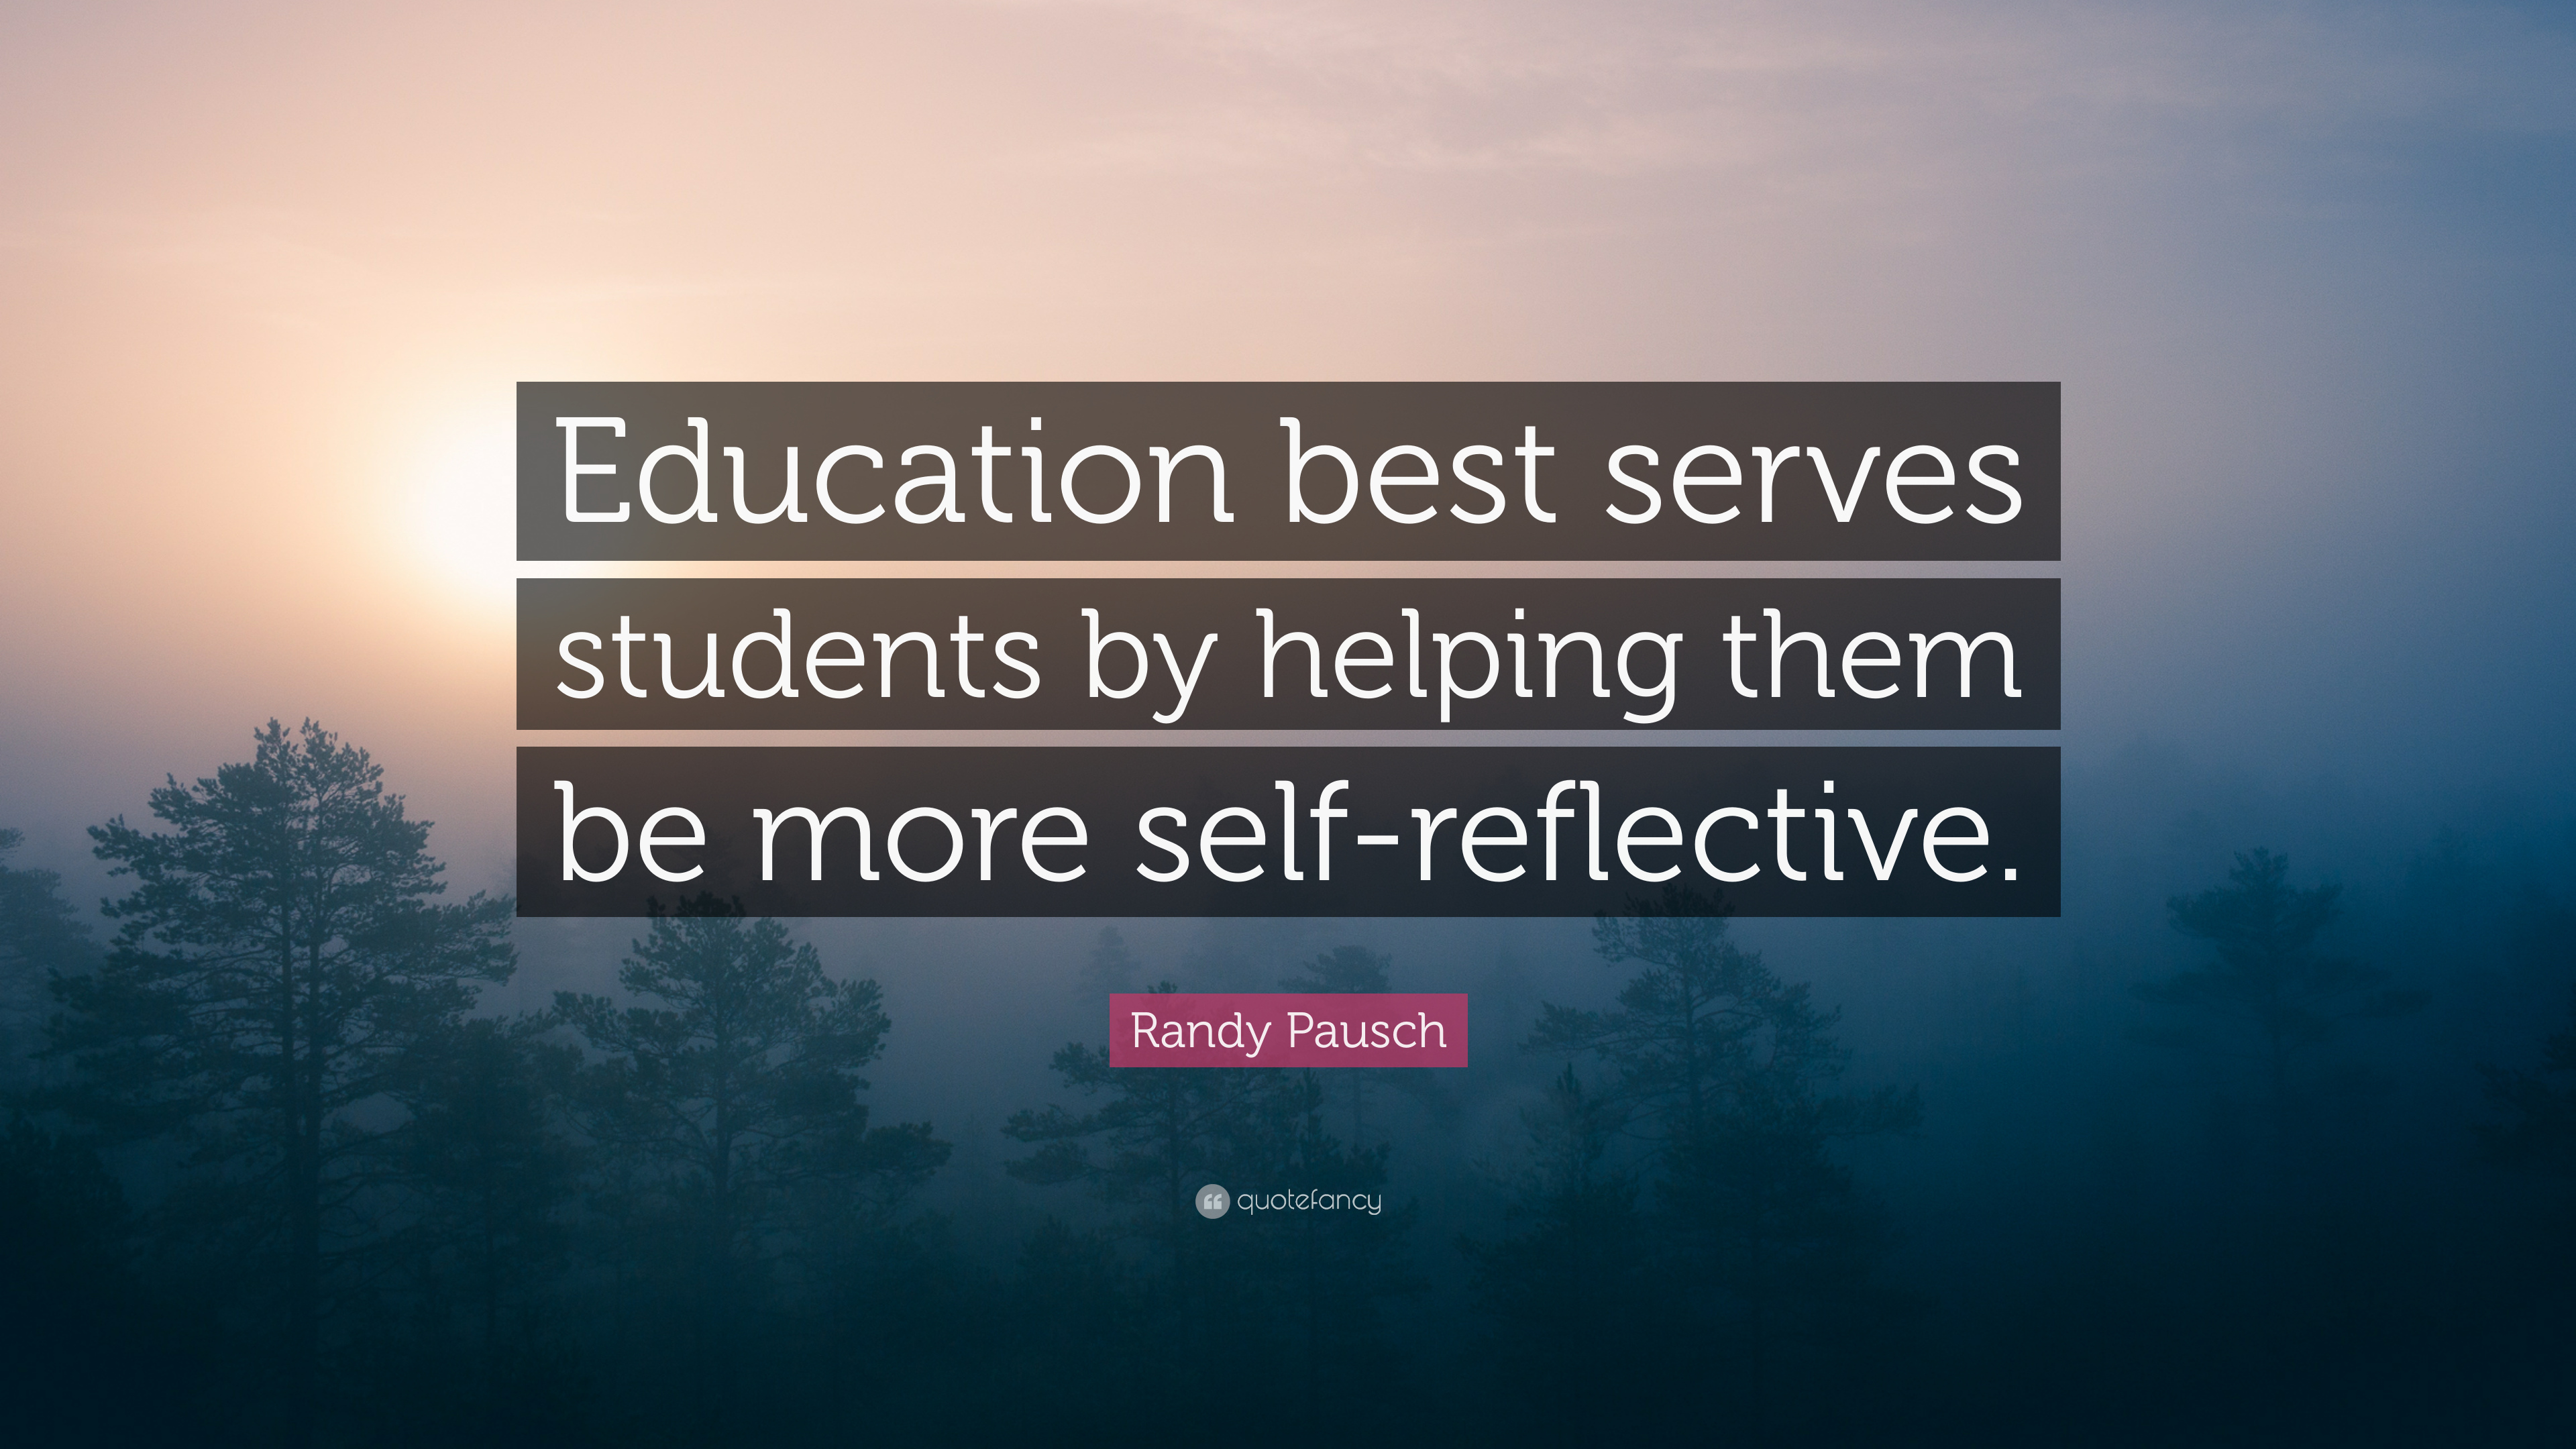 Randy Pausch Quote: “Education best serves students